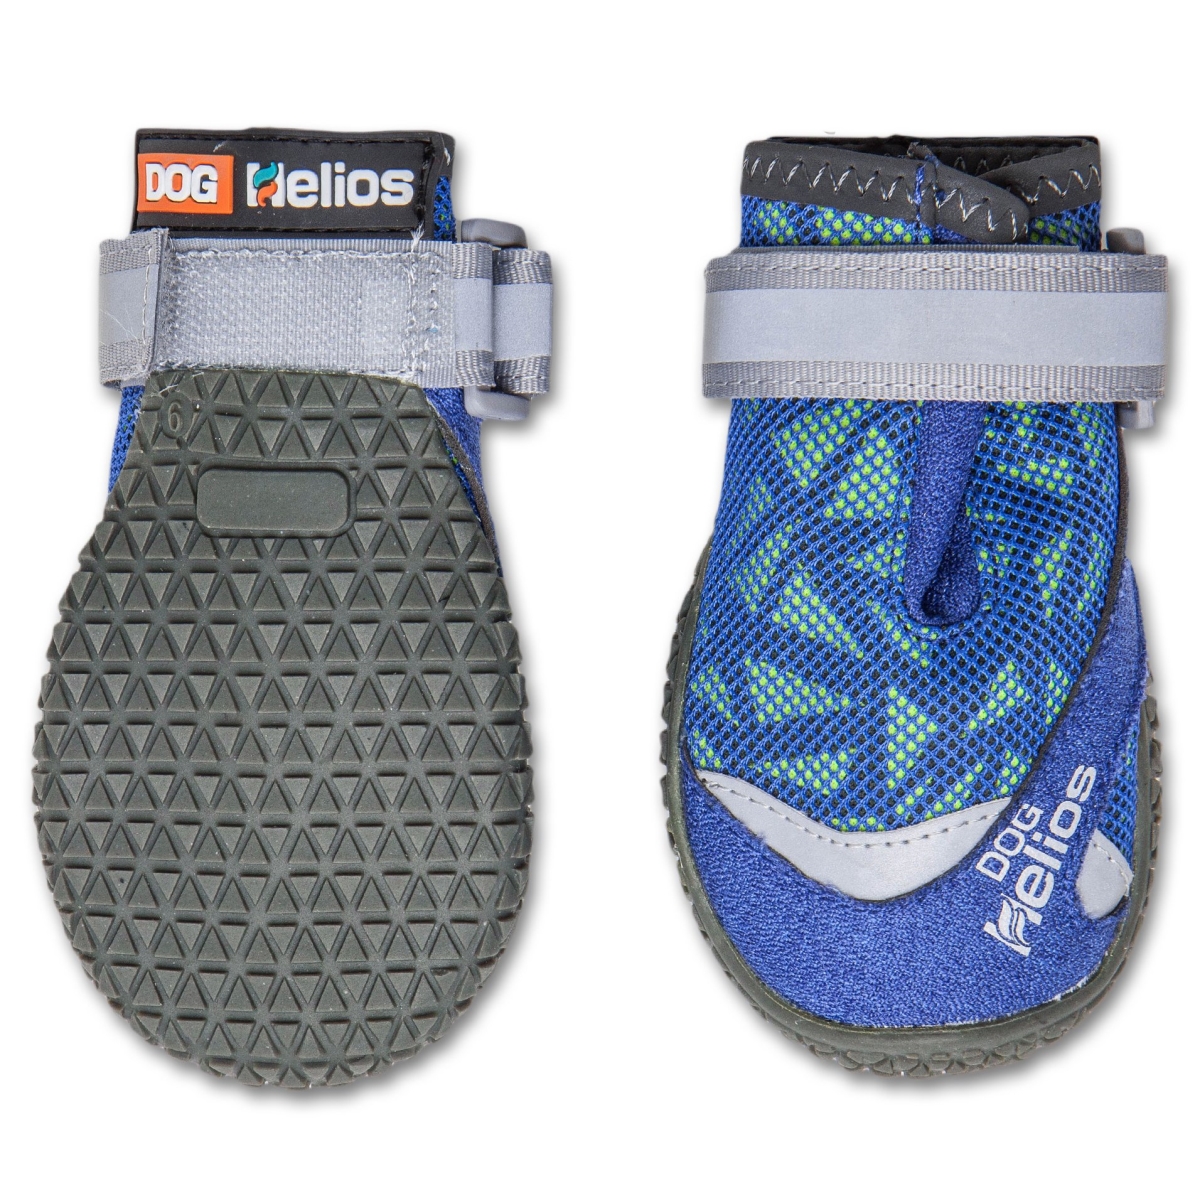 Picture of Dog Helios F17BLLG Surface Premium Grip Performance Dog Shoes - Blue - Large